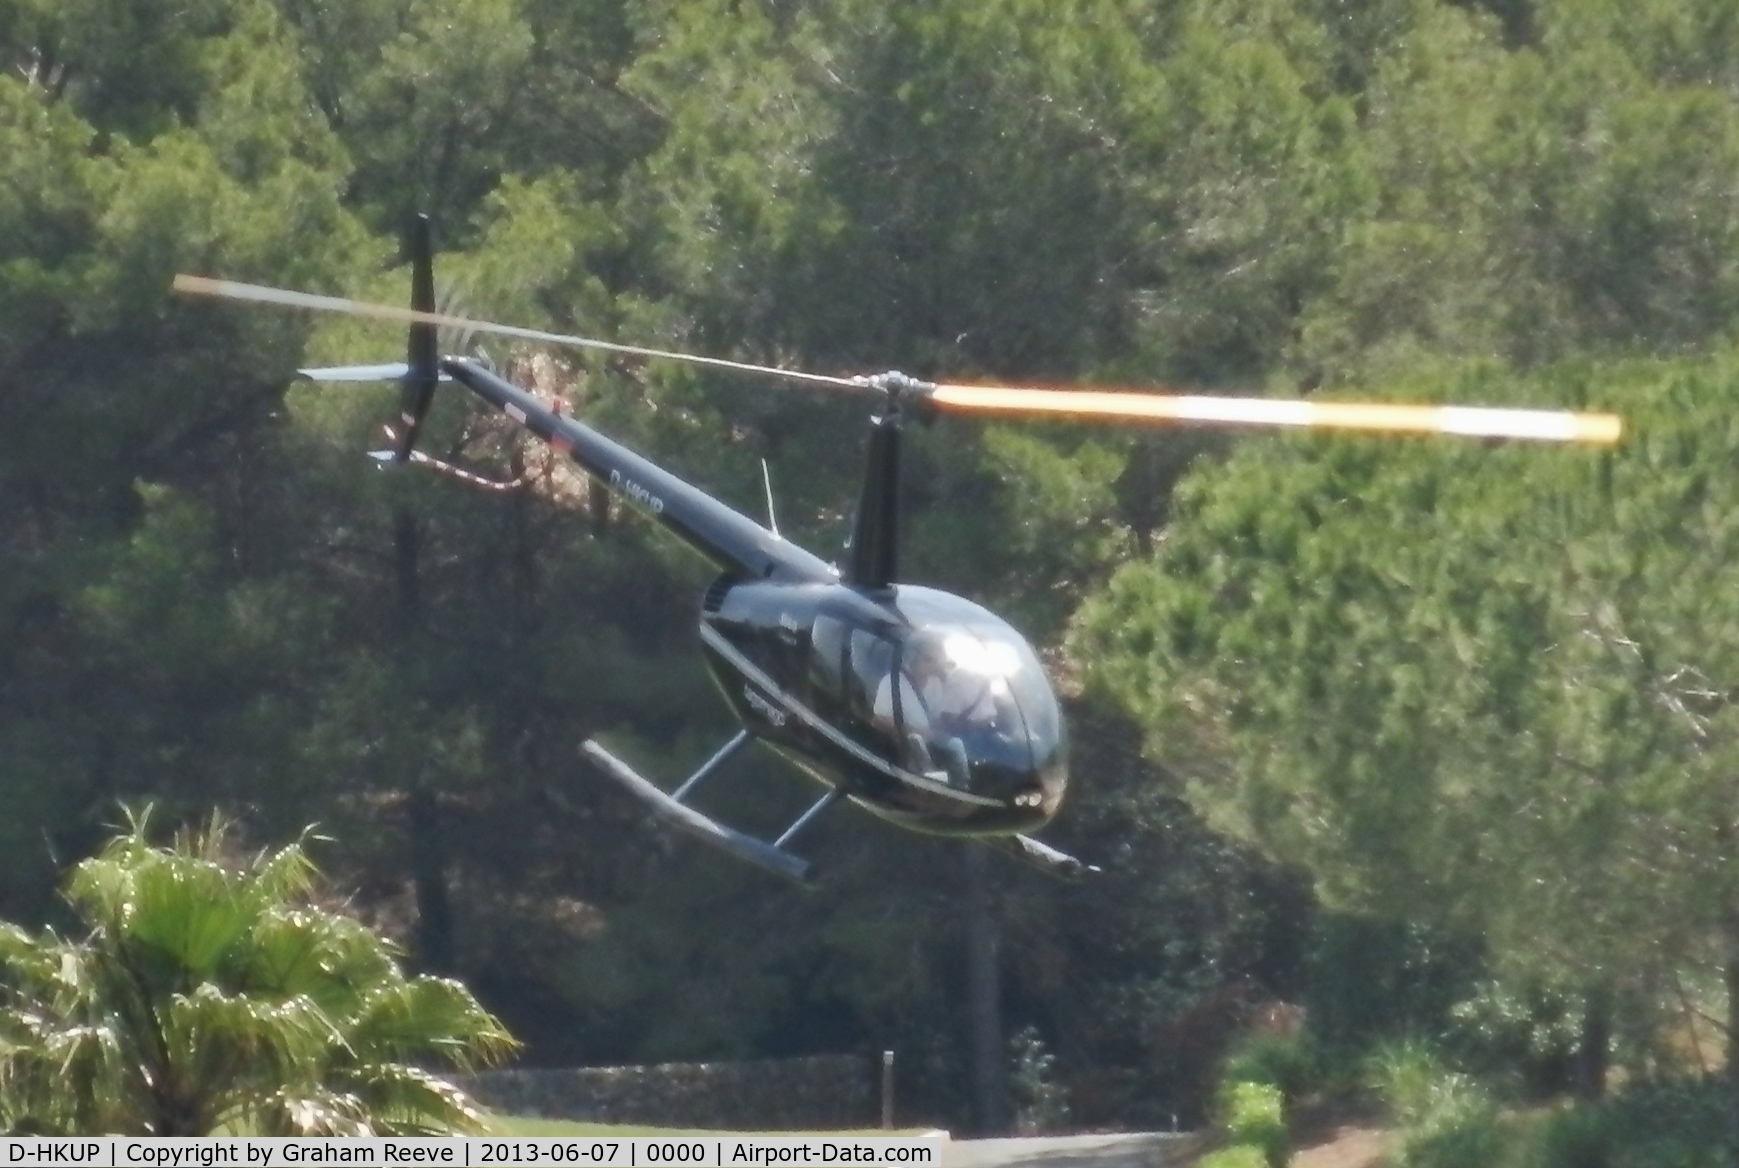 D-HKUP, Robinson R44 C/N 11450, Departing from a golf course in Camp de Mar, Majorca.